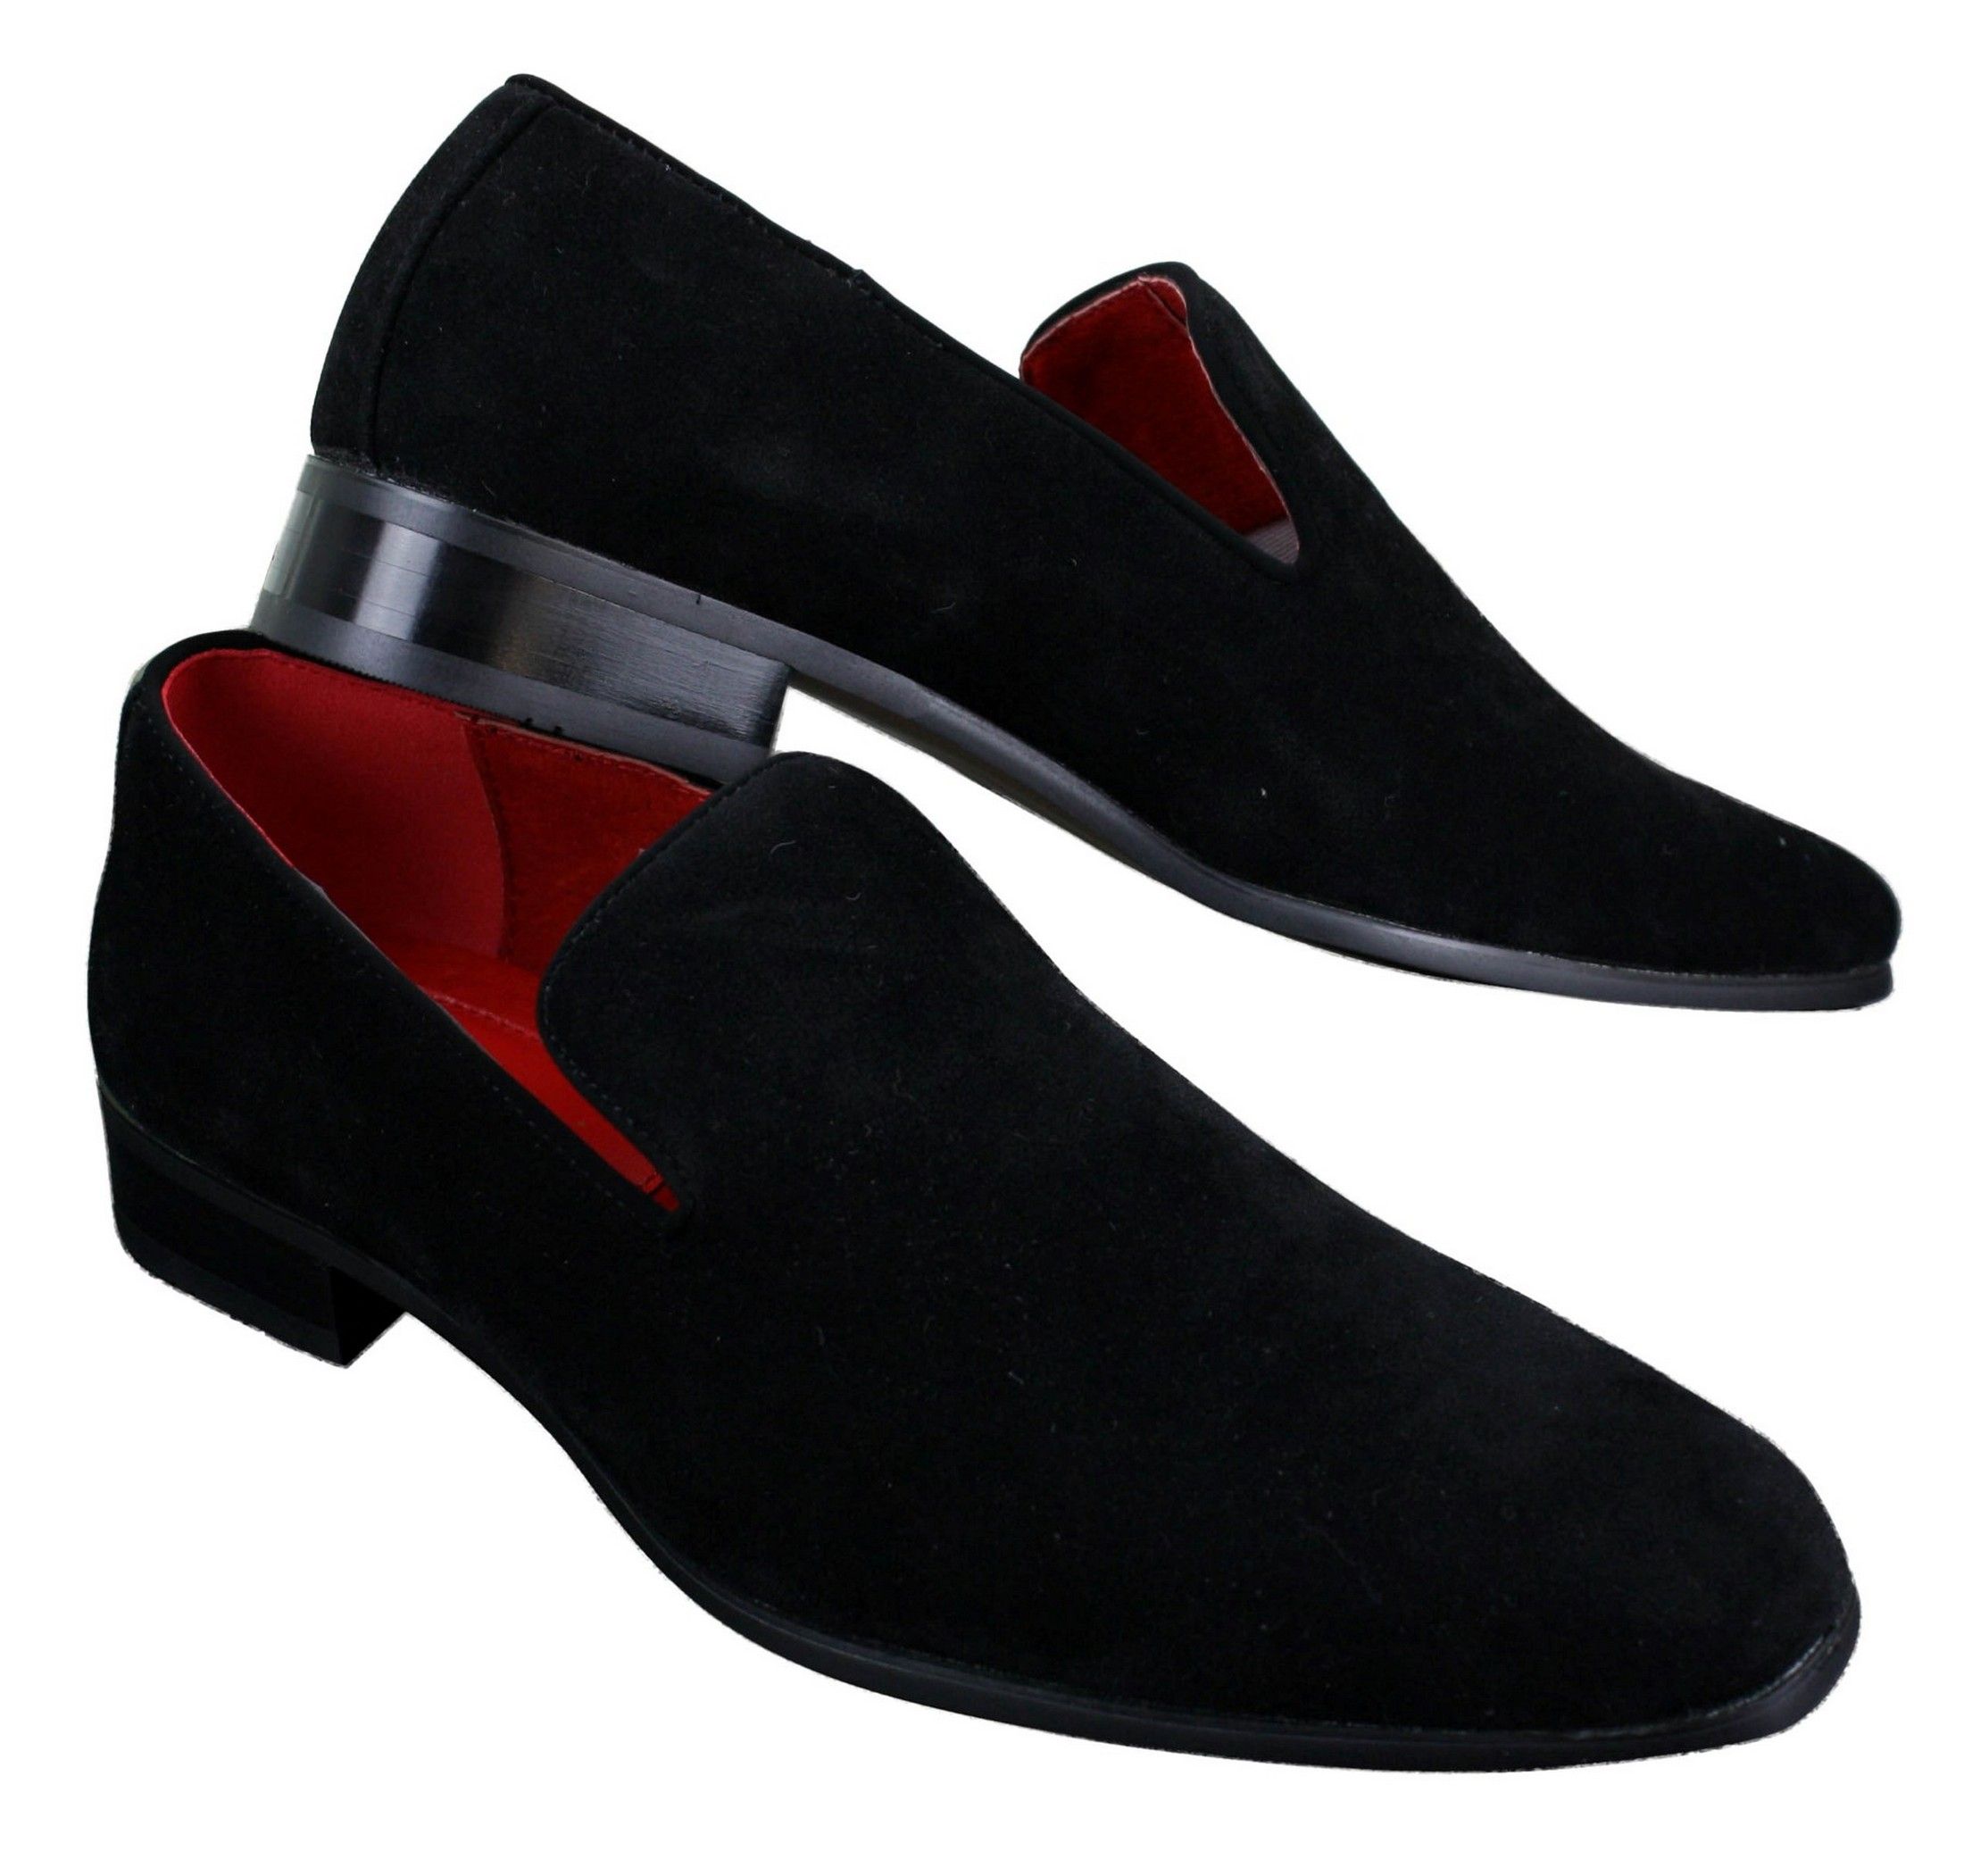 Leisure Shoes Loafers Men Lether Shoes Mens Black Dress Leather